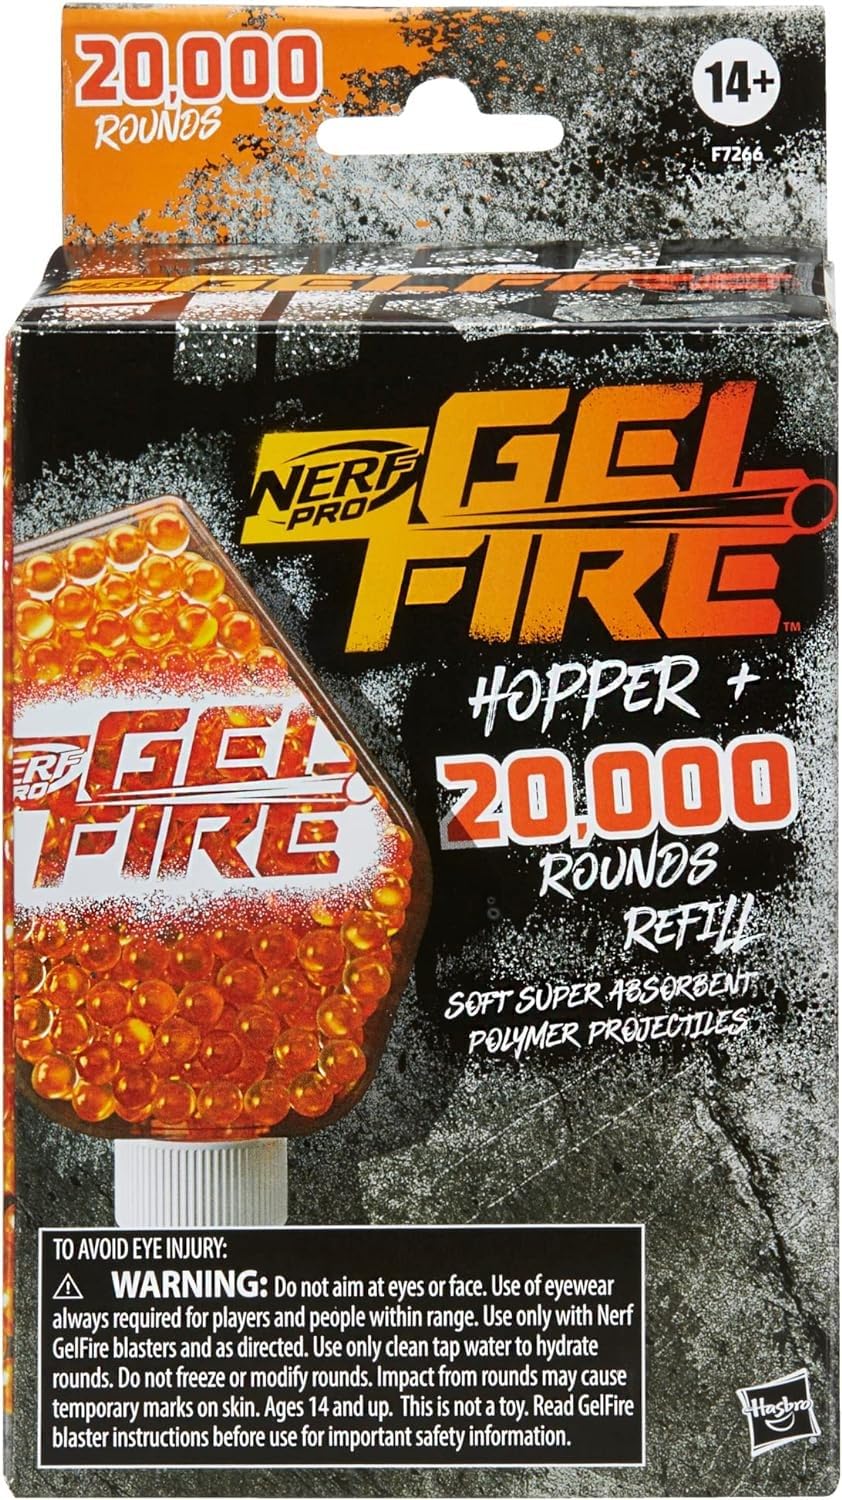 Nerf Pro Gelfire Refill 20,000 Dehydrated Gelfire Rounds & 1x 800 Round Hopper for Use with Nerf Gelfire Blasters for Ages 14 Years Up